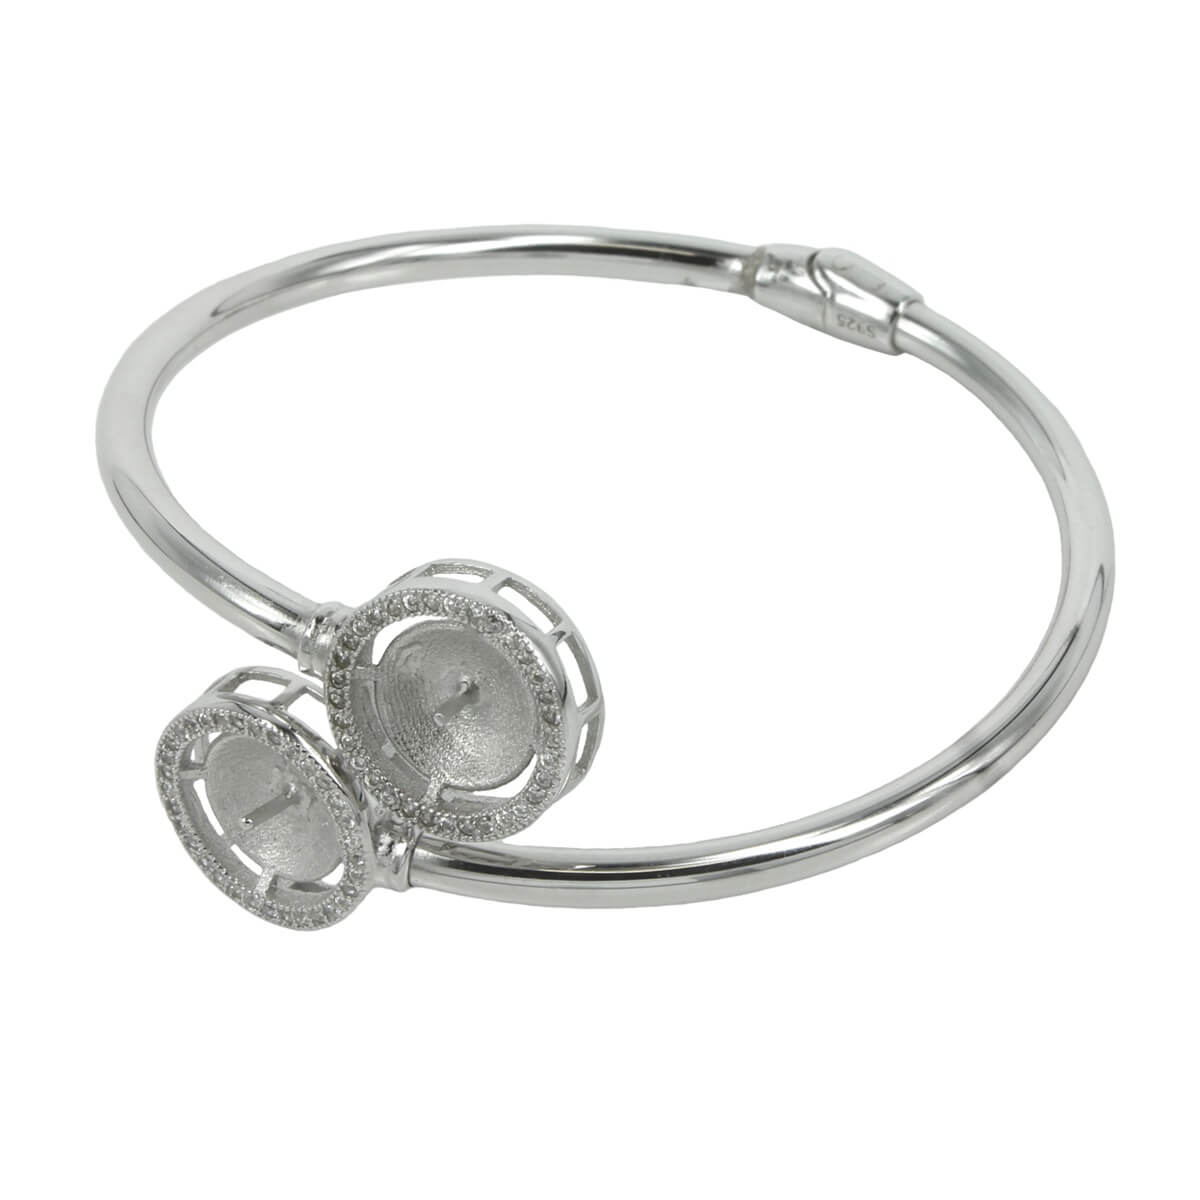 Hinged Cuff Bracelet with Cubic Zirconias Embellished Pearl Mountings in Sterling Silver 8-10mm